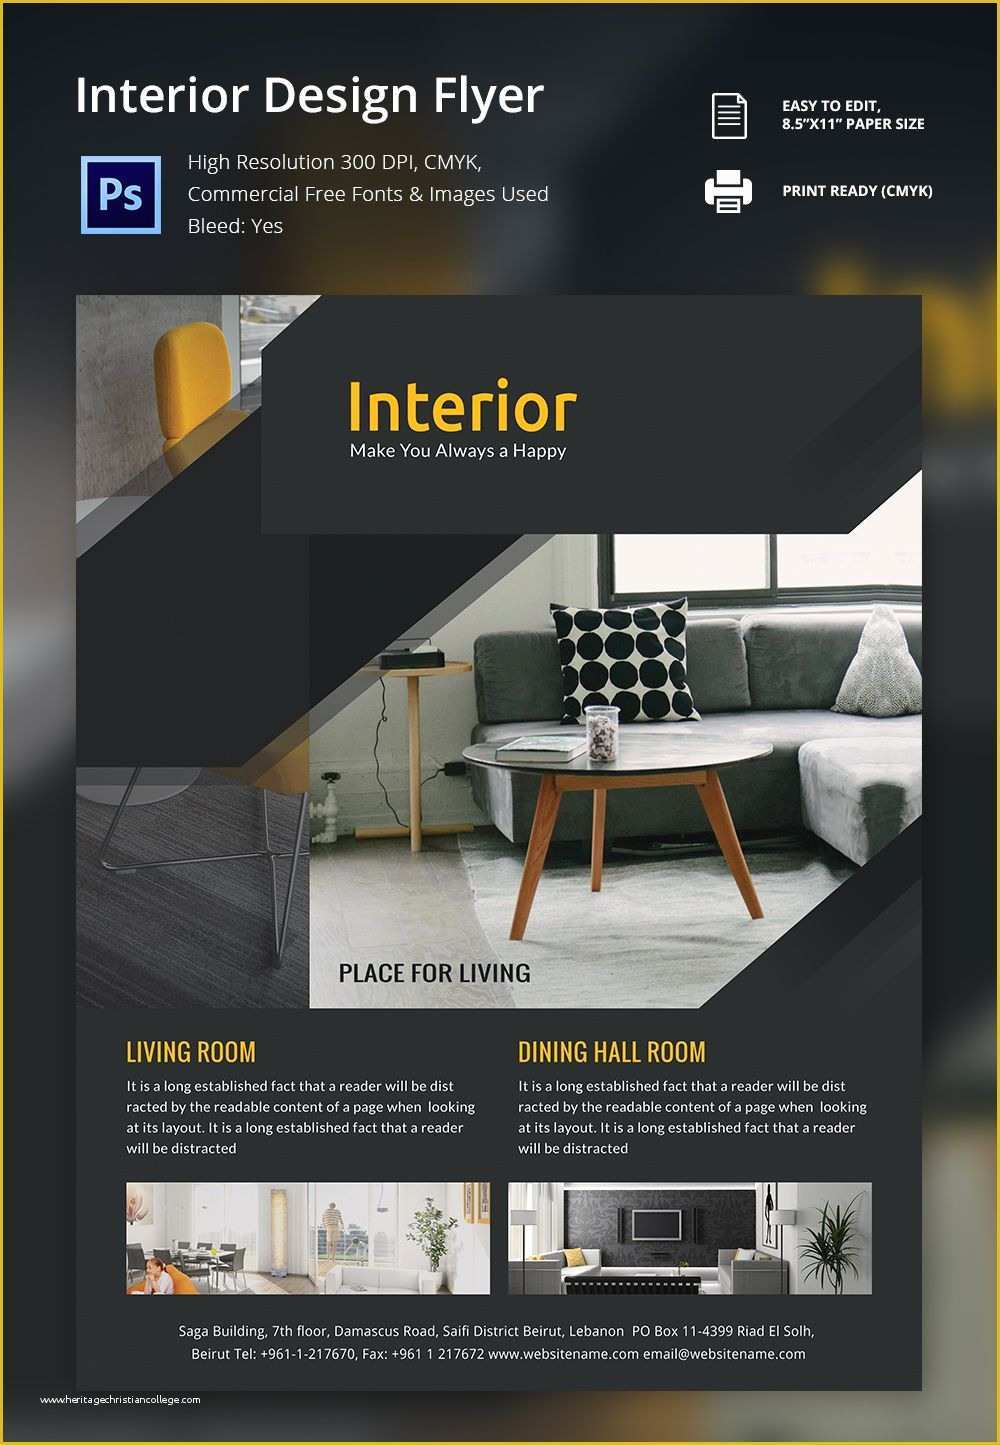 Remodeling Flyer Templates Free Of Interior Design Flyer Template 25 Free Psd Ai Vector Eps